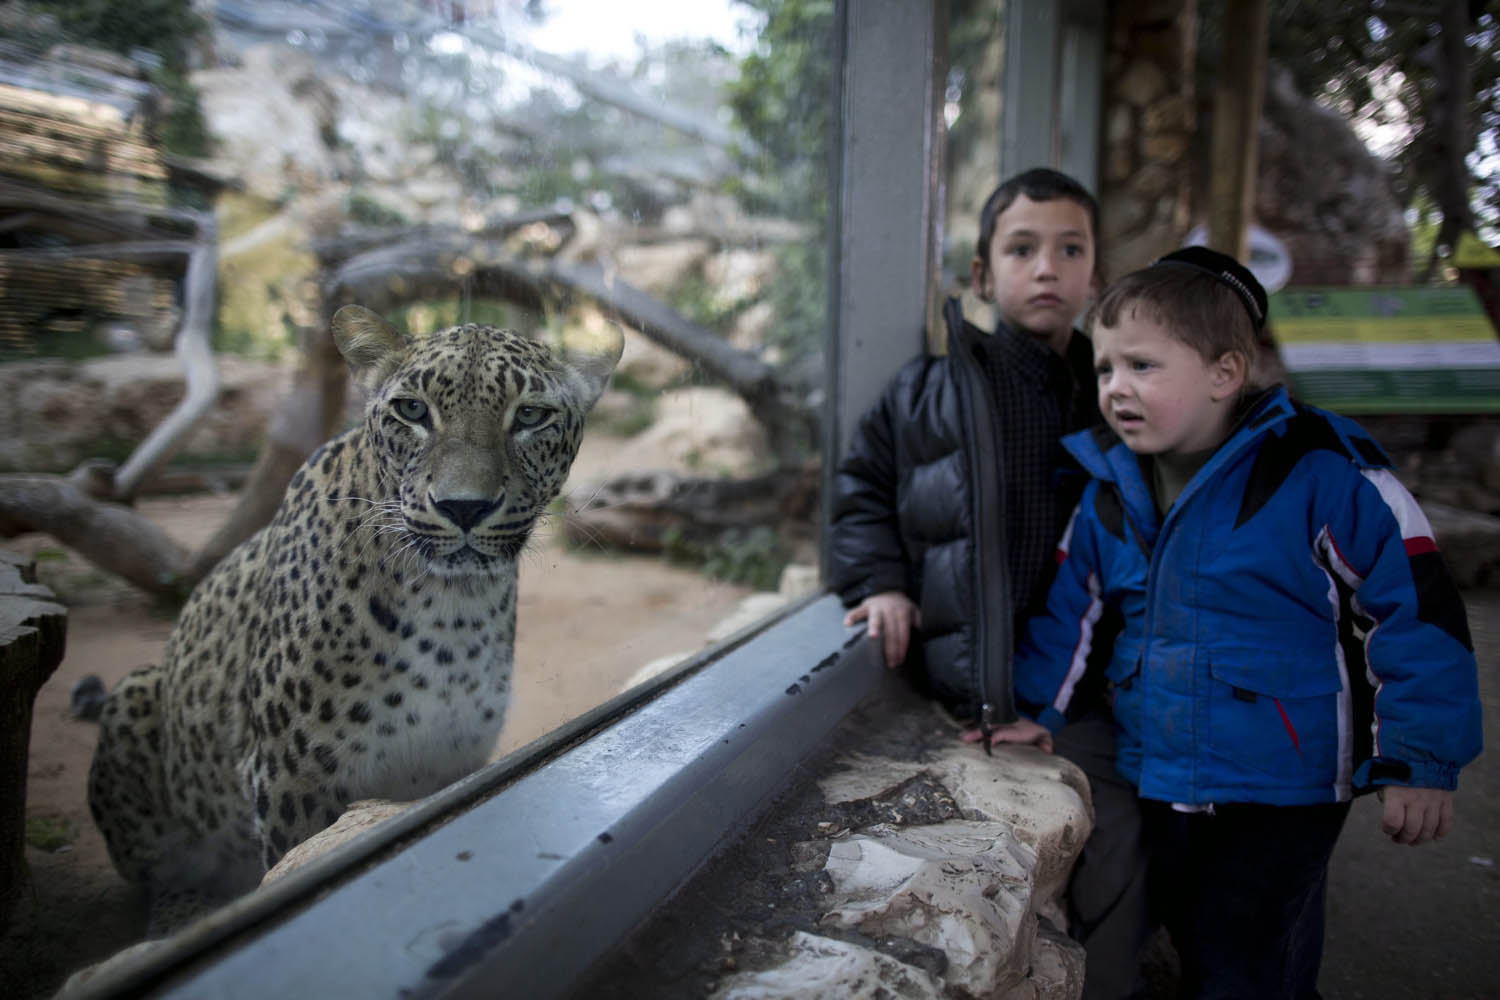 Mar. 30, 2014. Young ultra-Orthodox Jews look at a Persian leopard at the Biblical Zoo in Jerusalem, Israel.